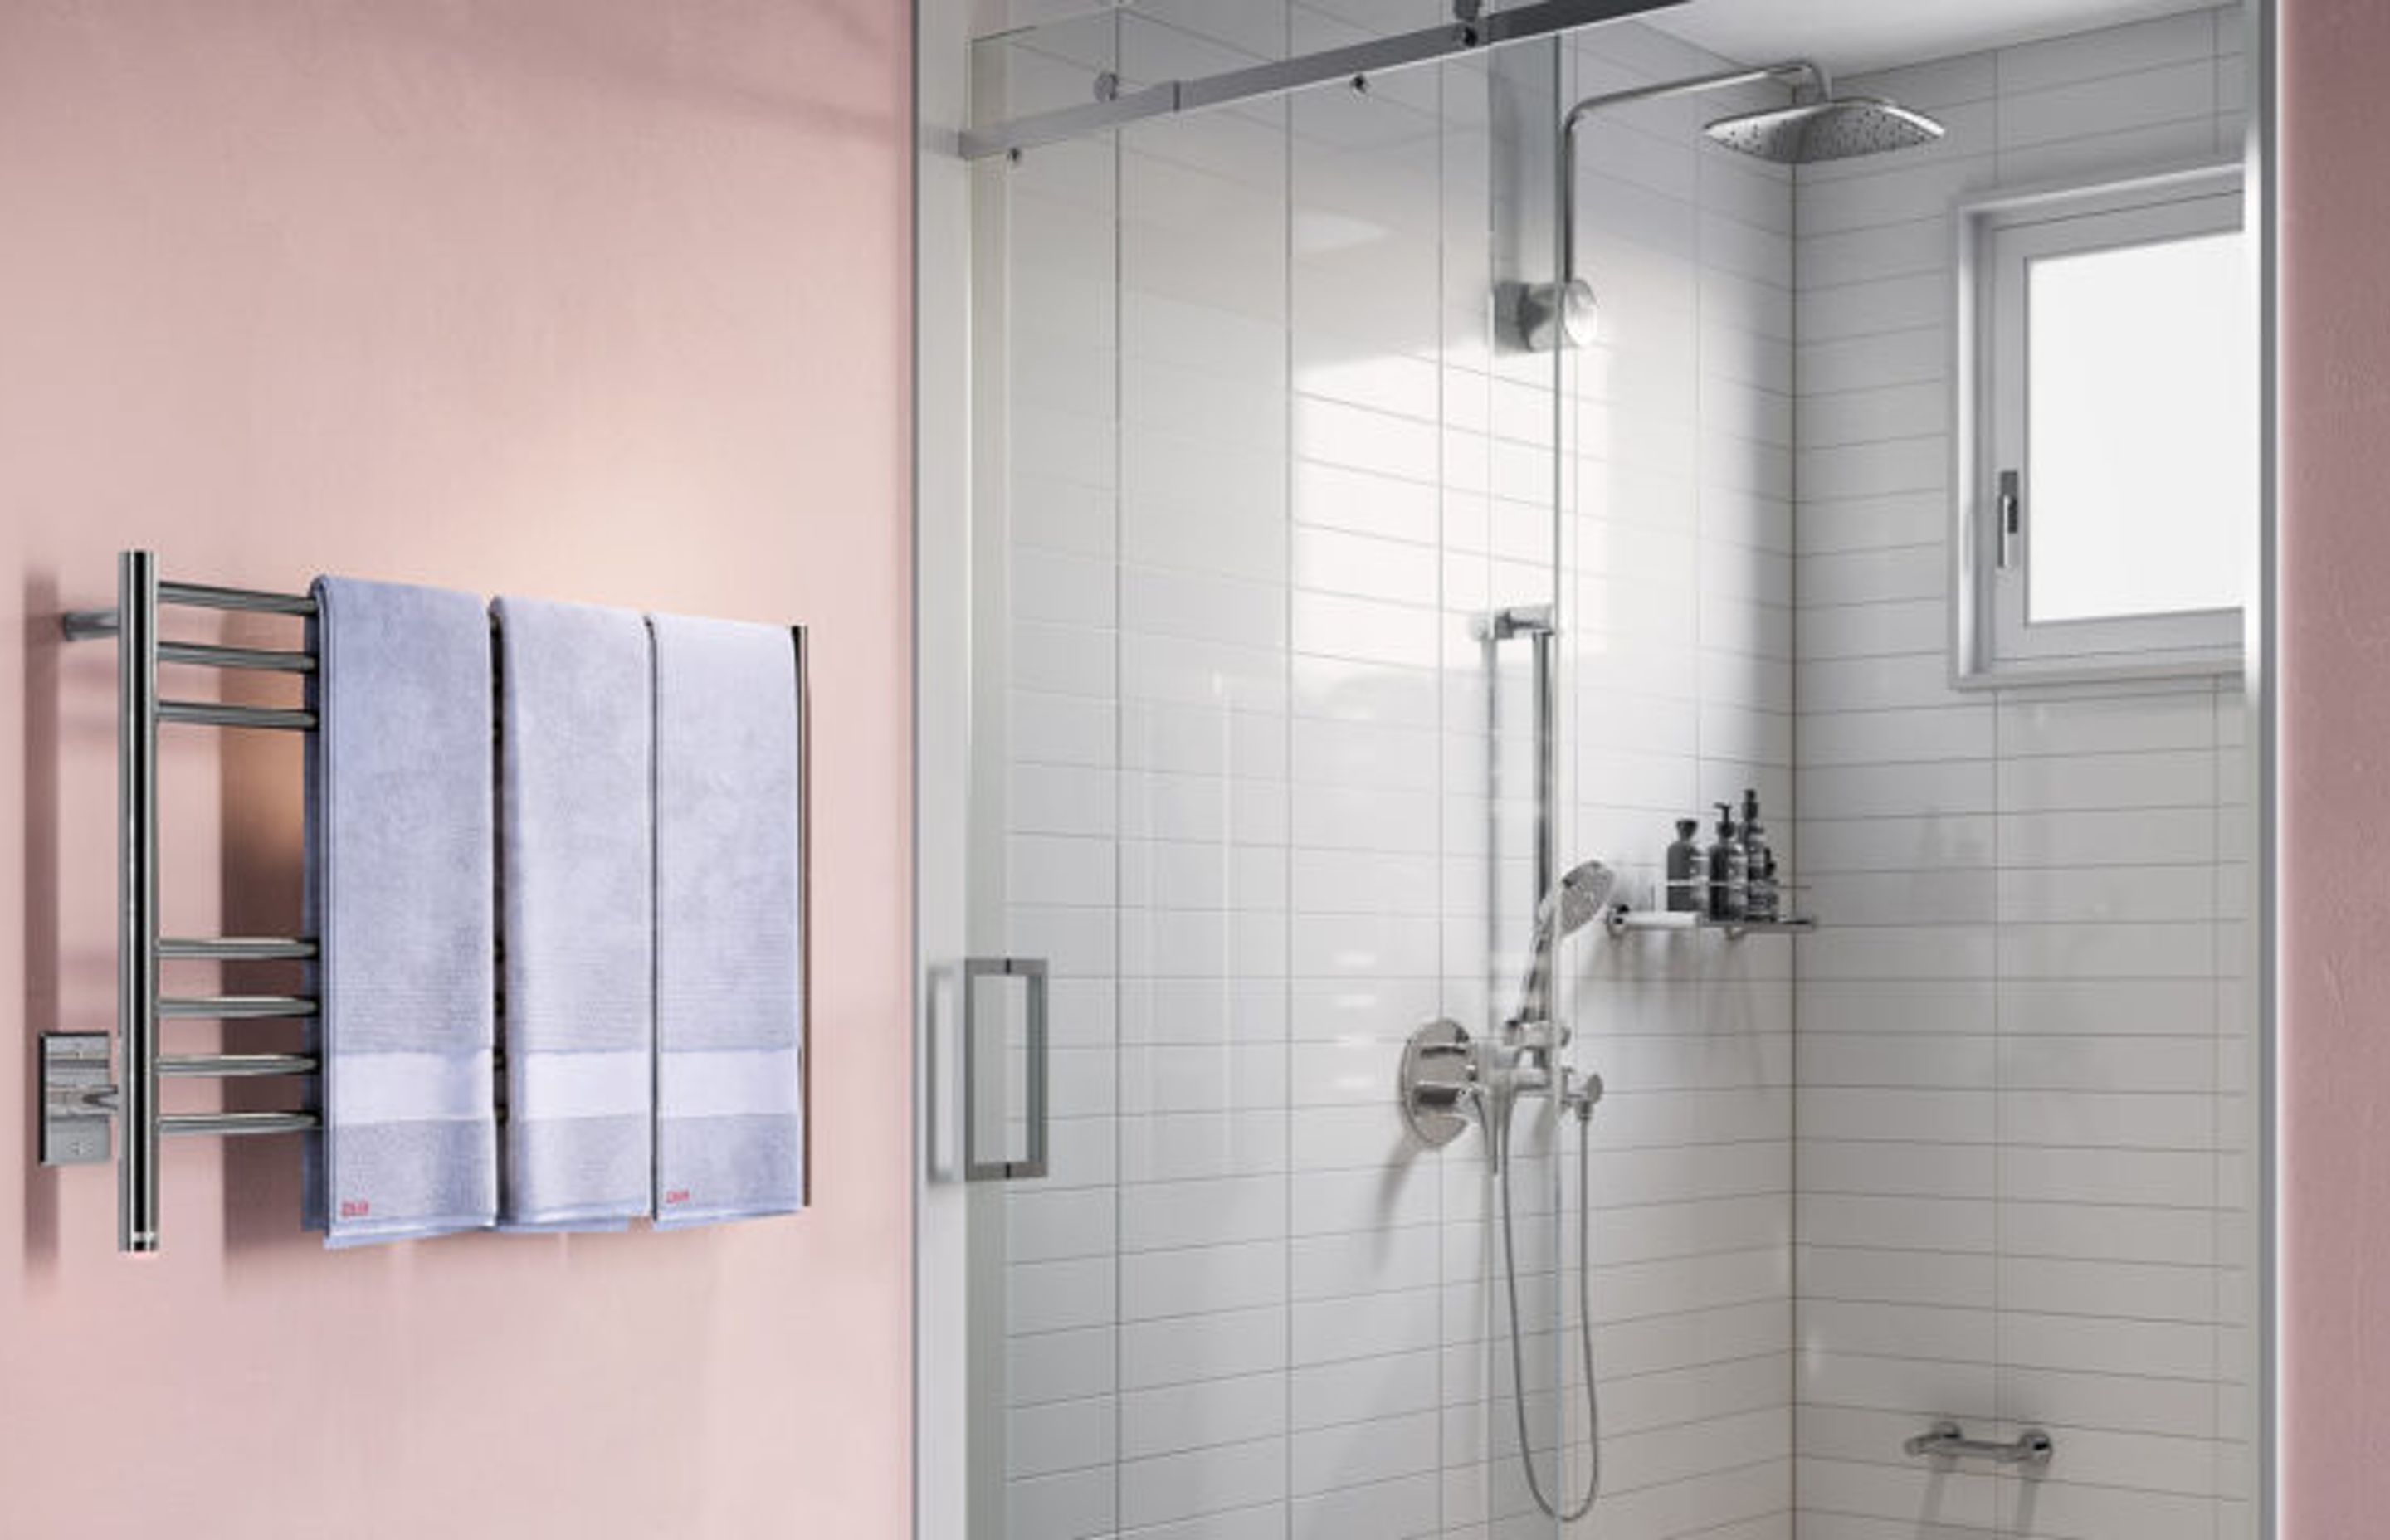 NATURAL 7 Bar 800mm heated towel rail with PTSelect Switch (US model shown here - square cover plate)